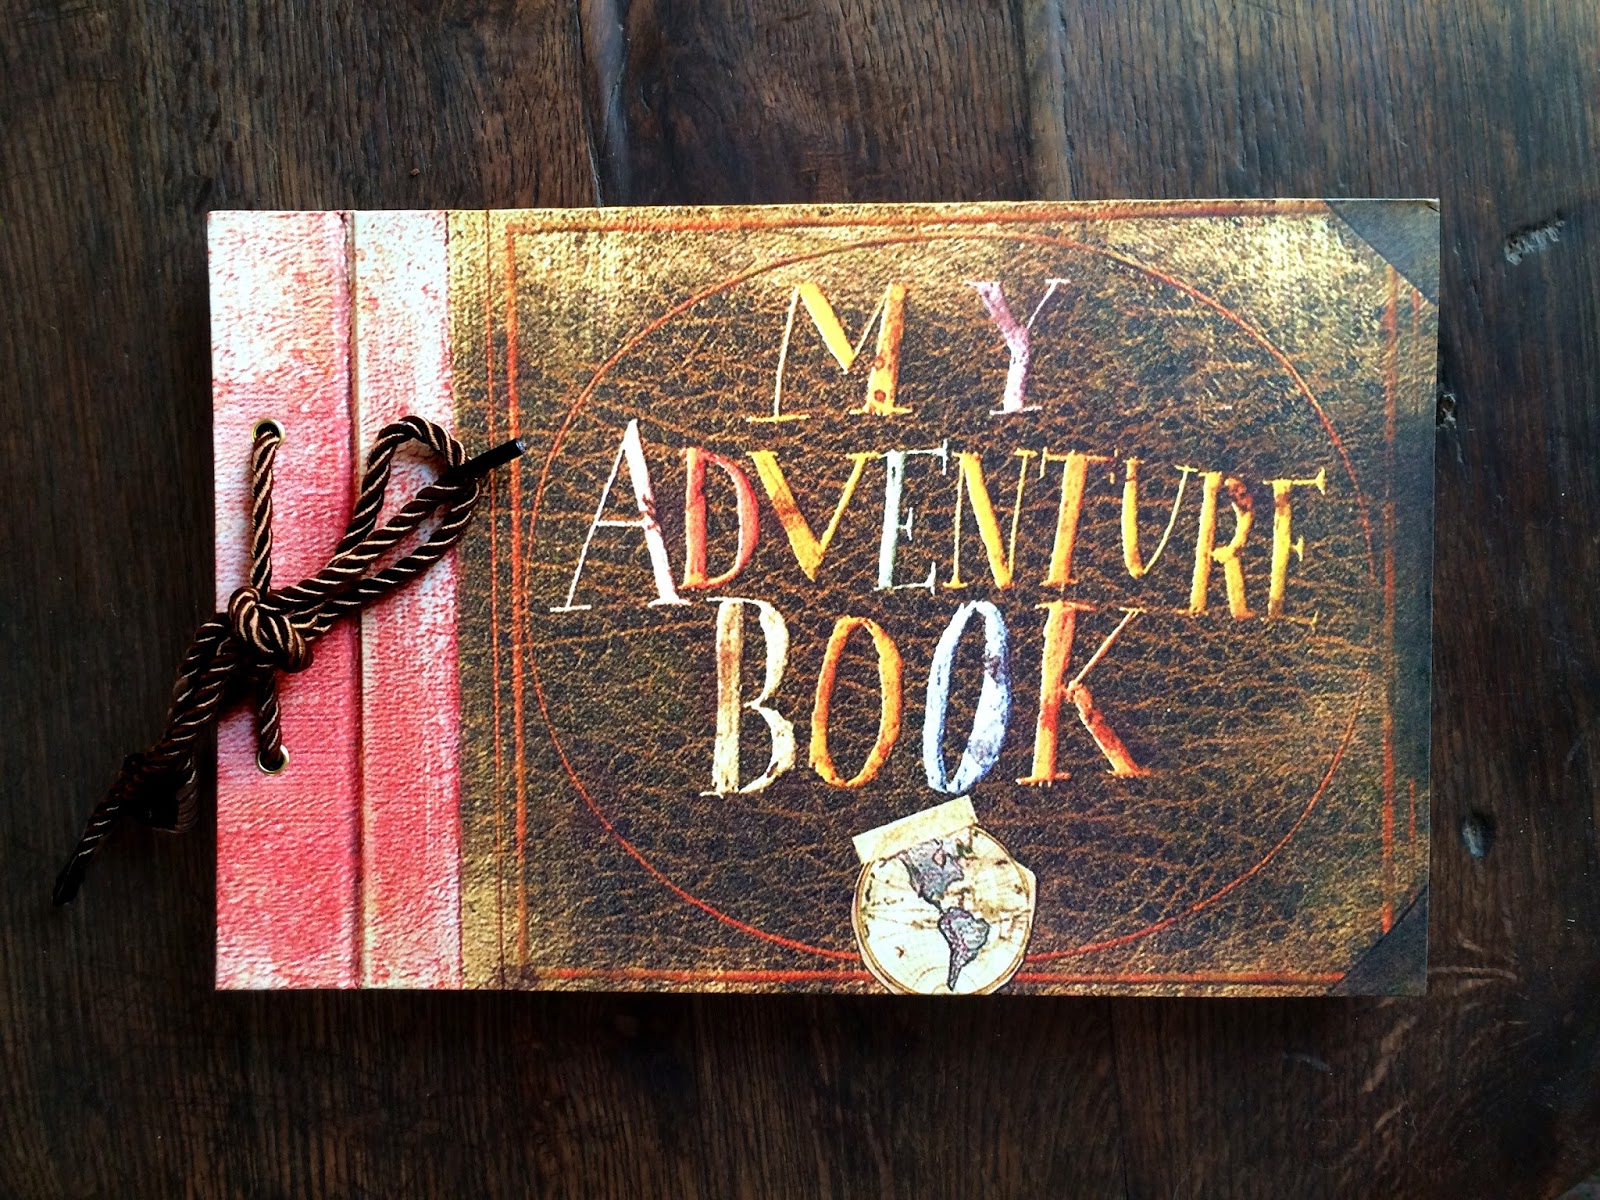 my adventure book! scrapbook inspired by the movie UP  Adventure book  scrapbook, Our adventure book, Adventure book